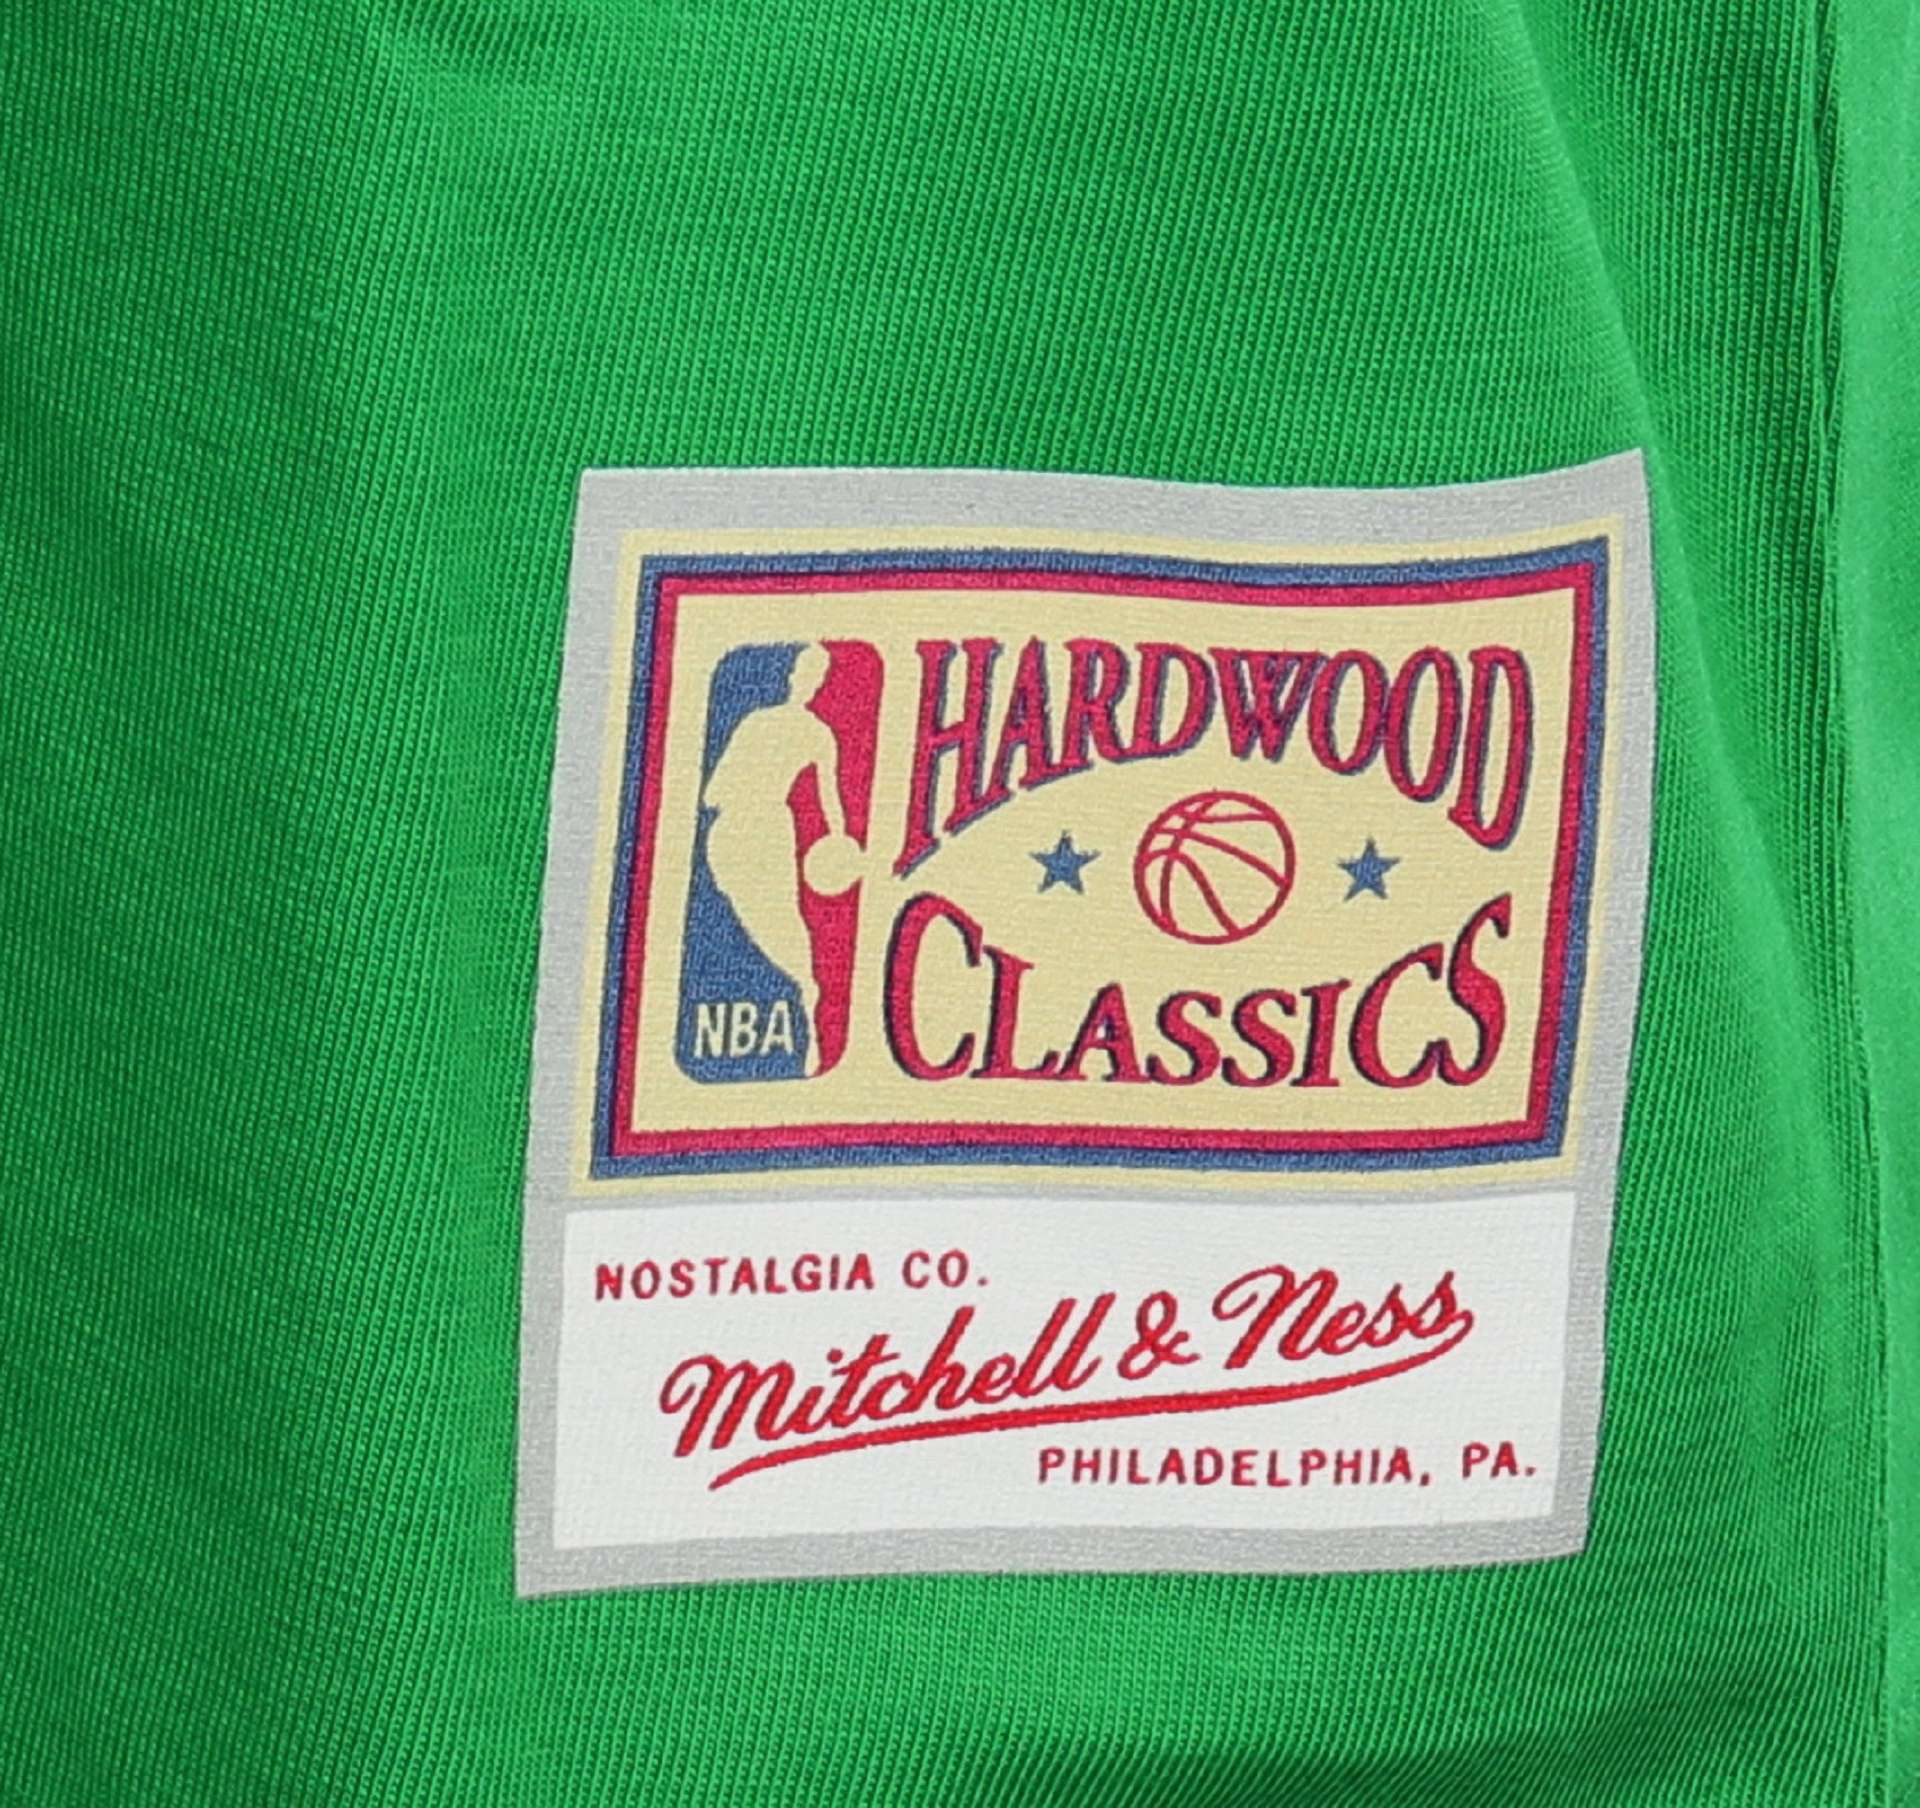 Larry Bird #33 Boston Celtics Kelly Green NBA Name and Number Tee T-Shirt Mitchell & Ness